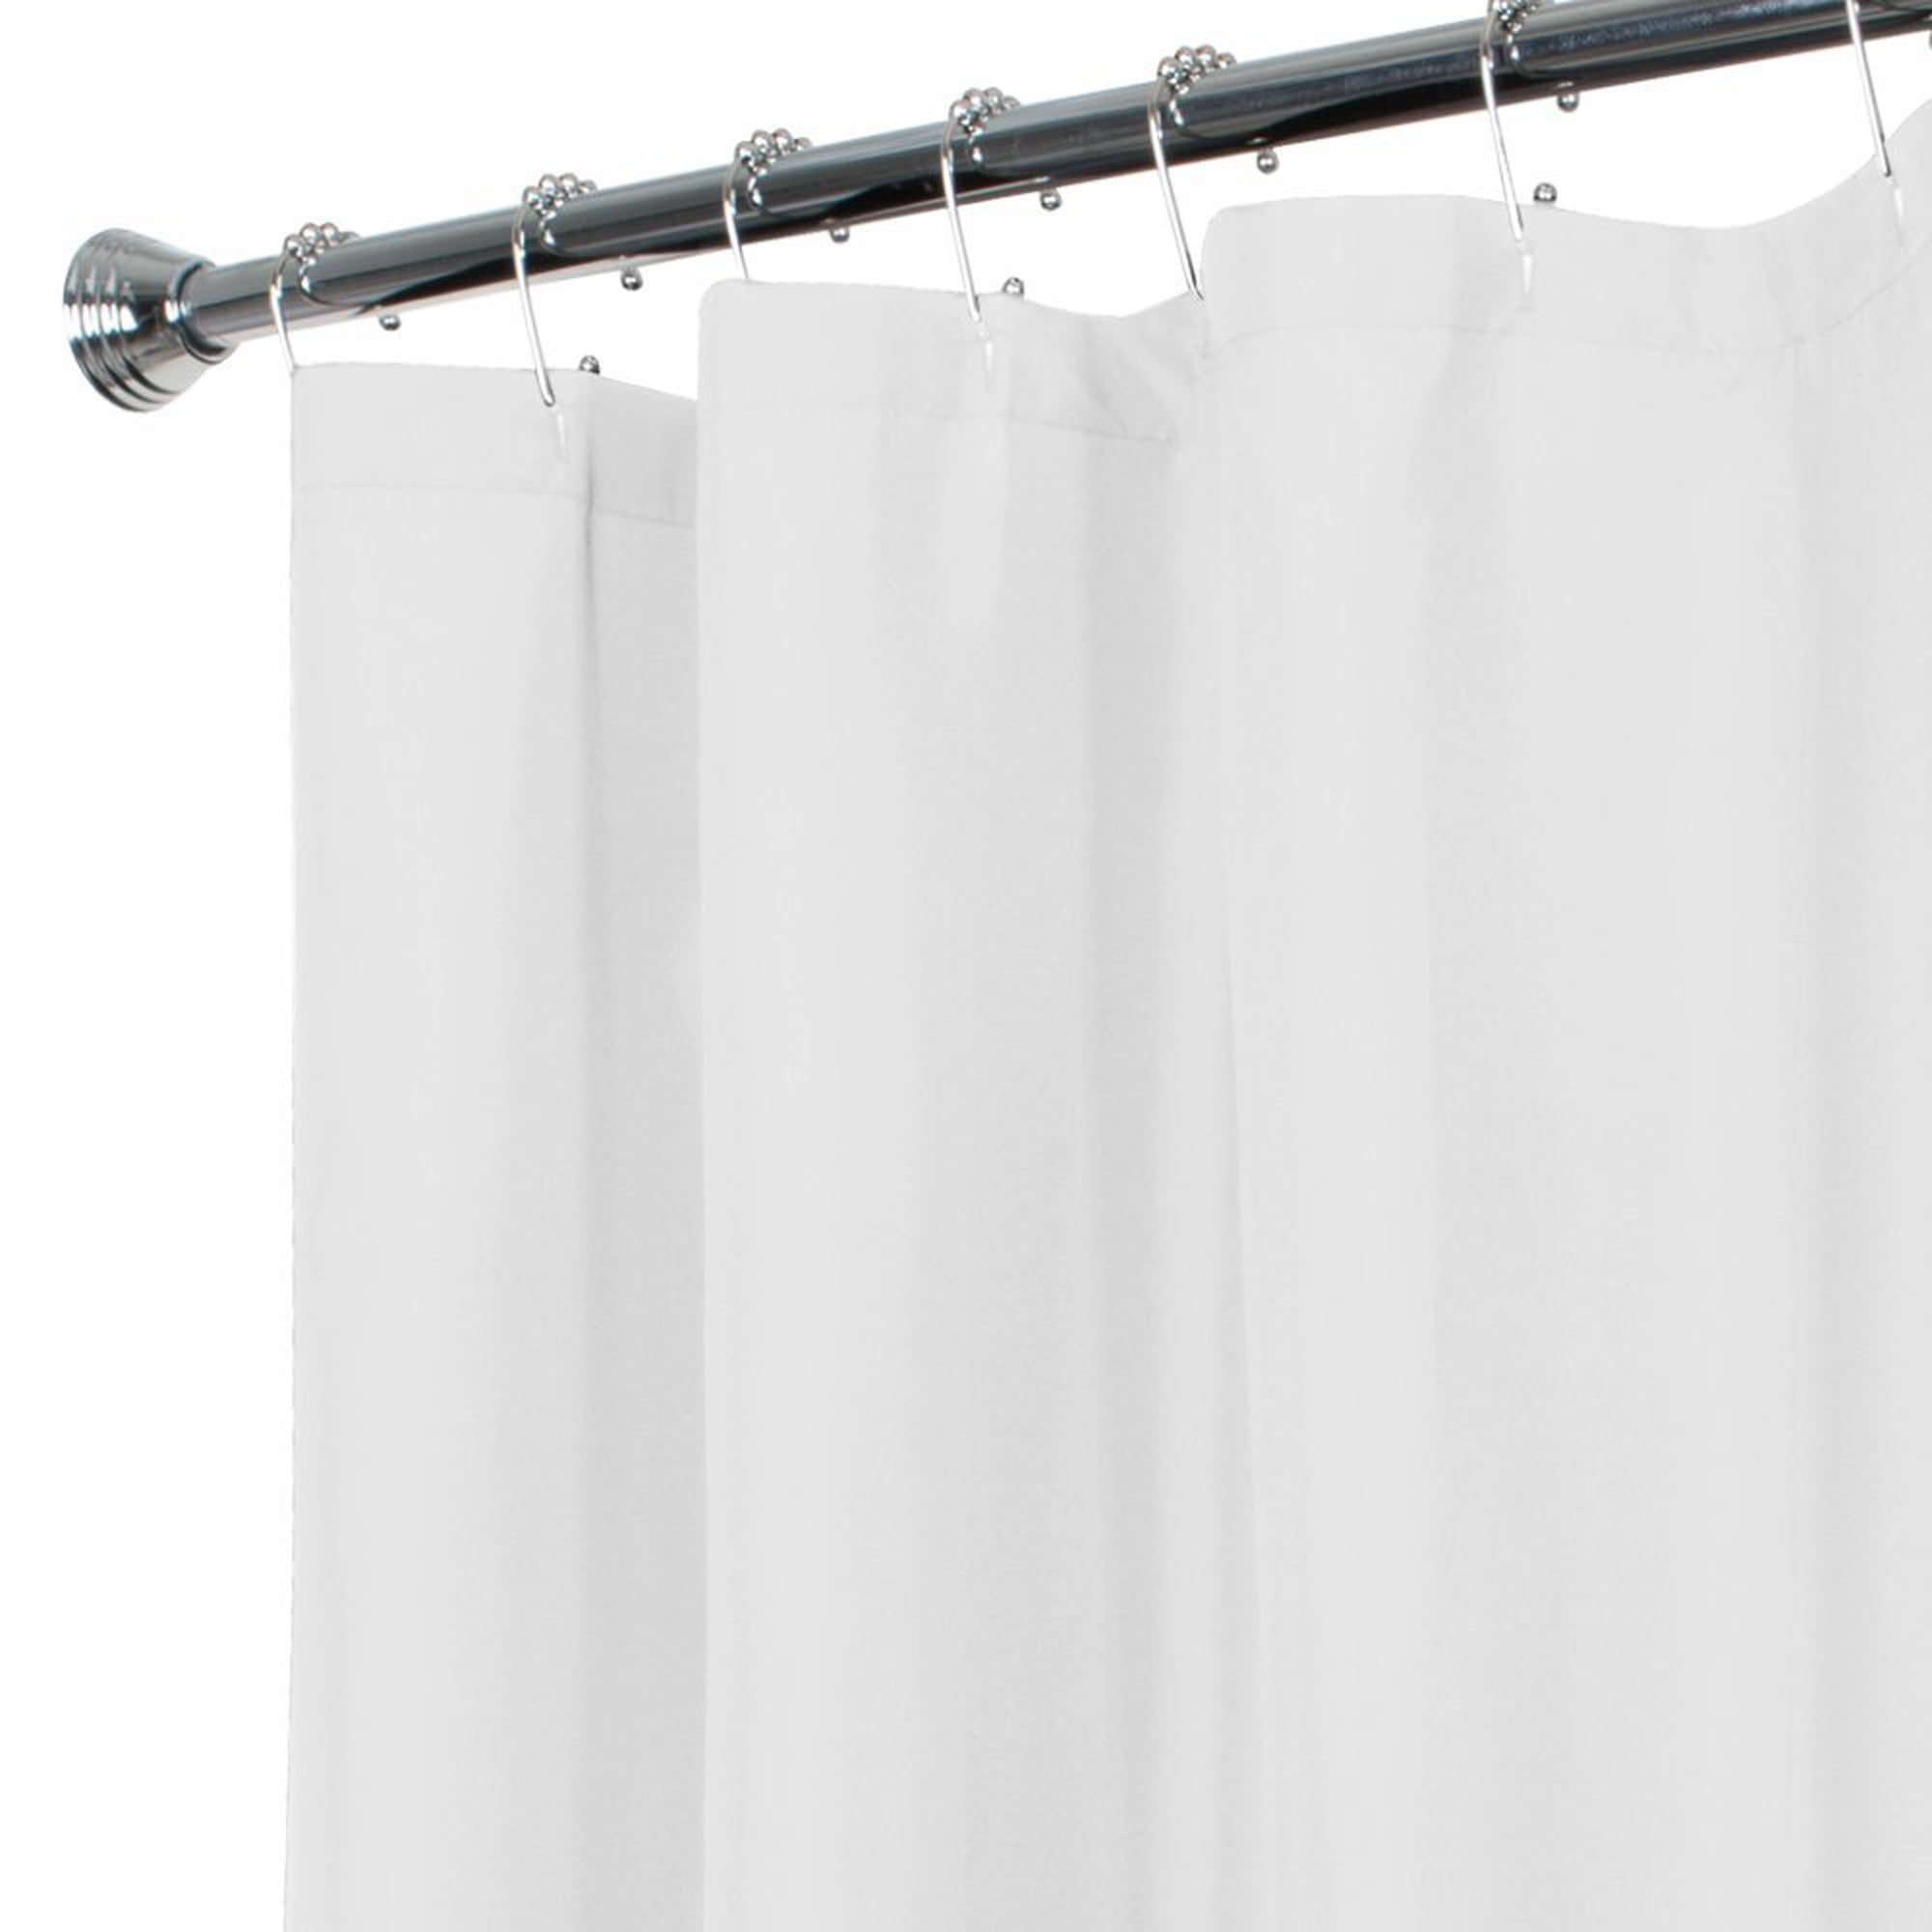 LiBa Mildew Resistant Fabric Shower Curtain Waterproof and Water Repellent and 